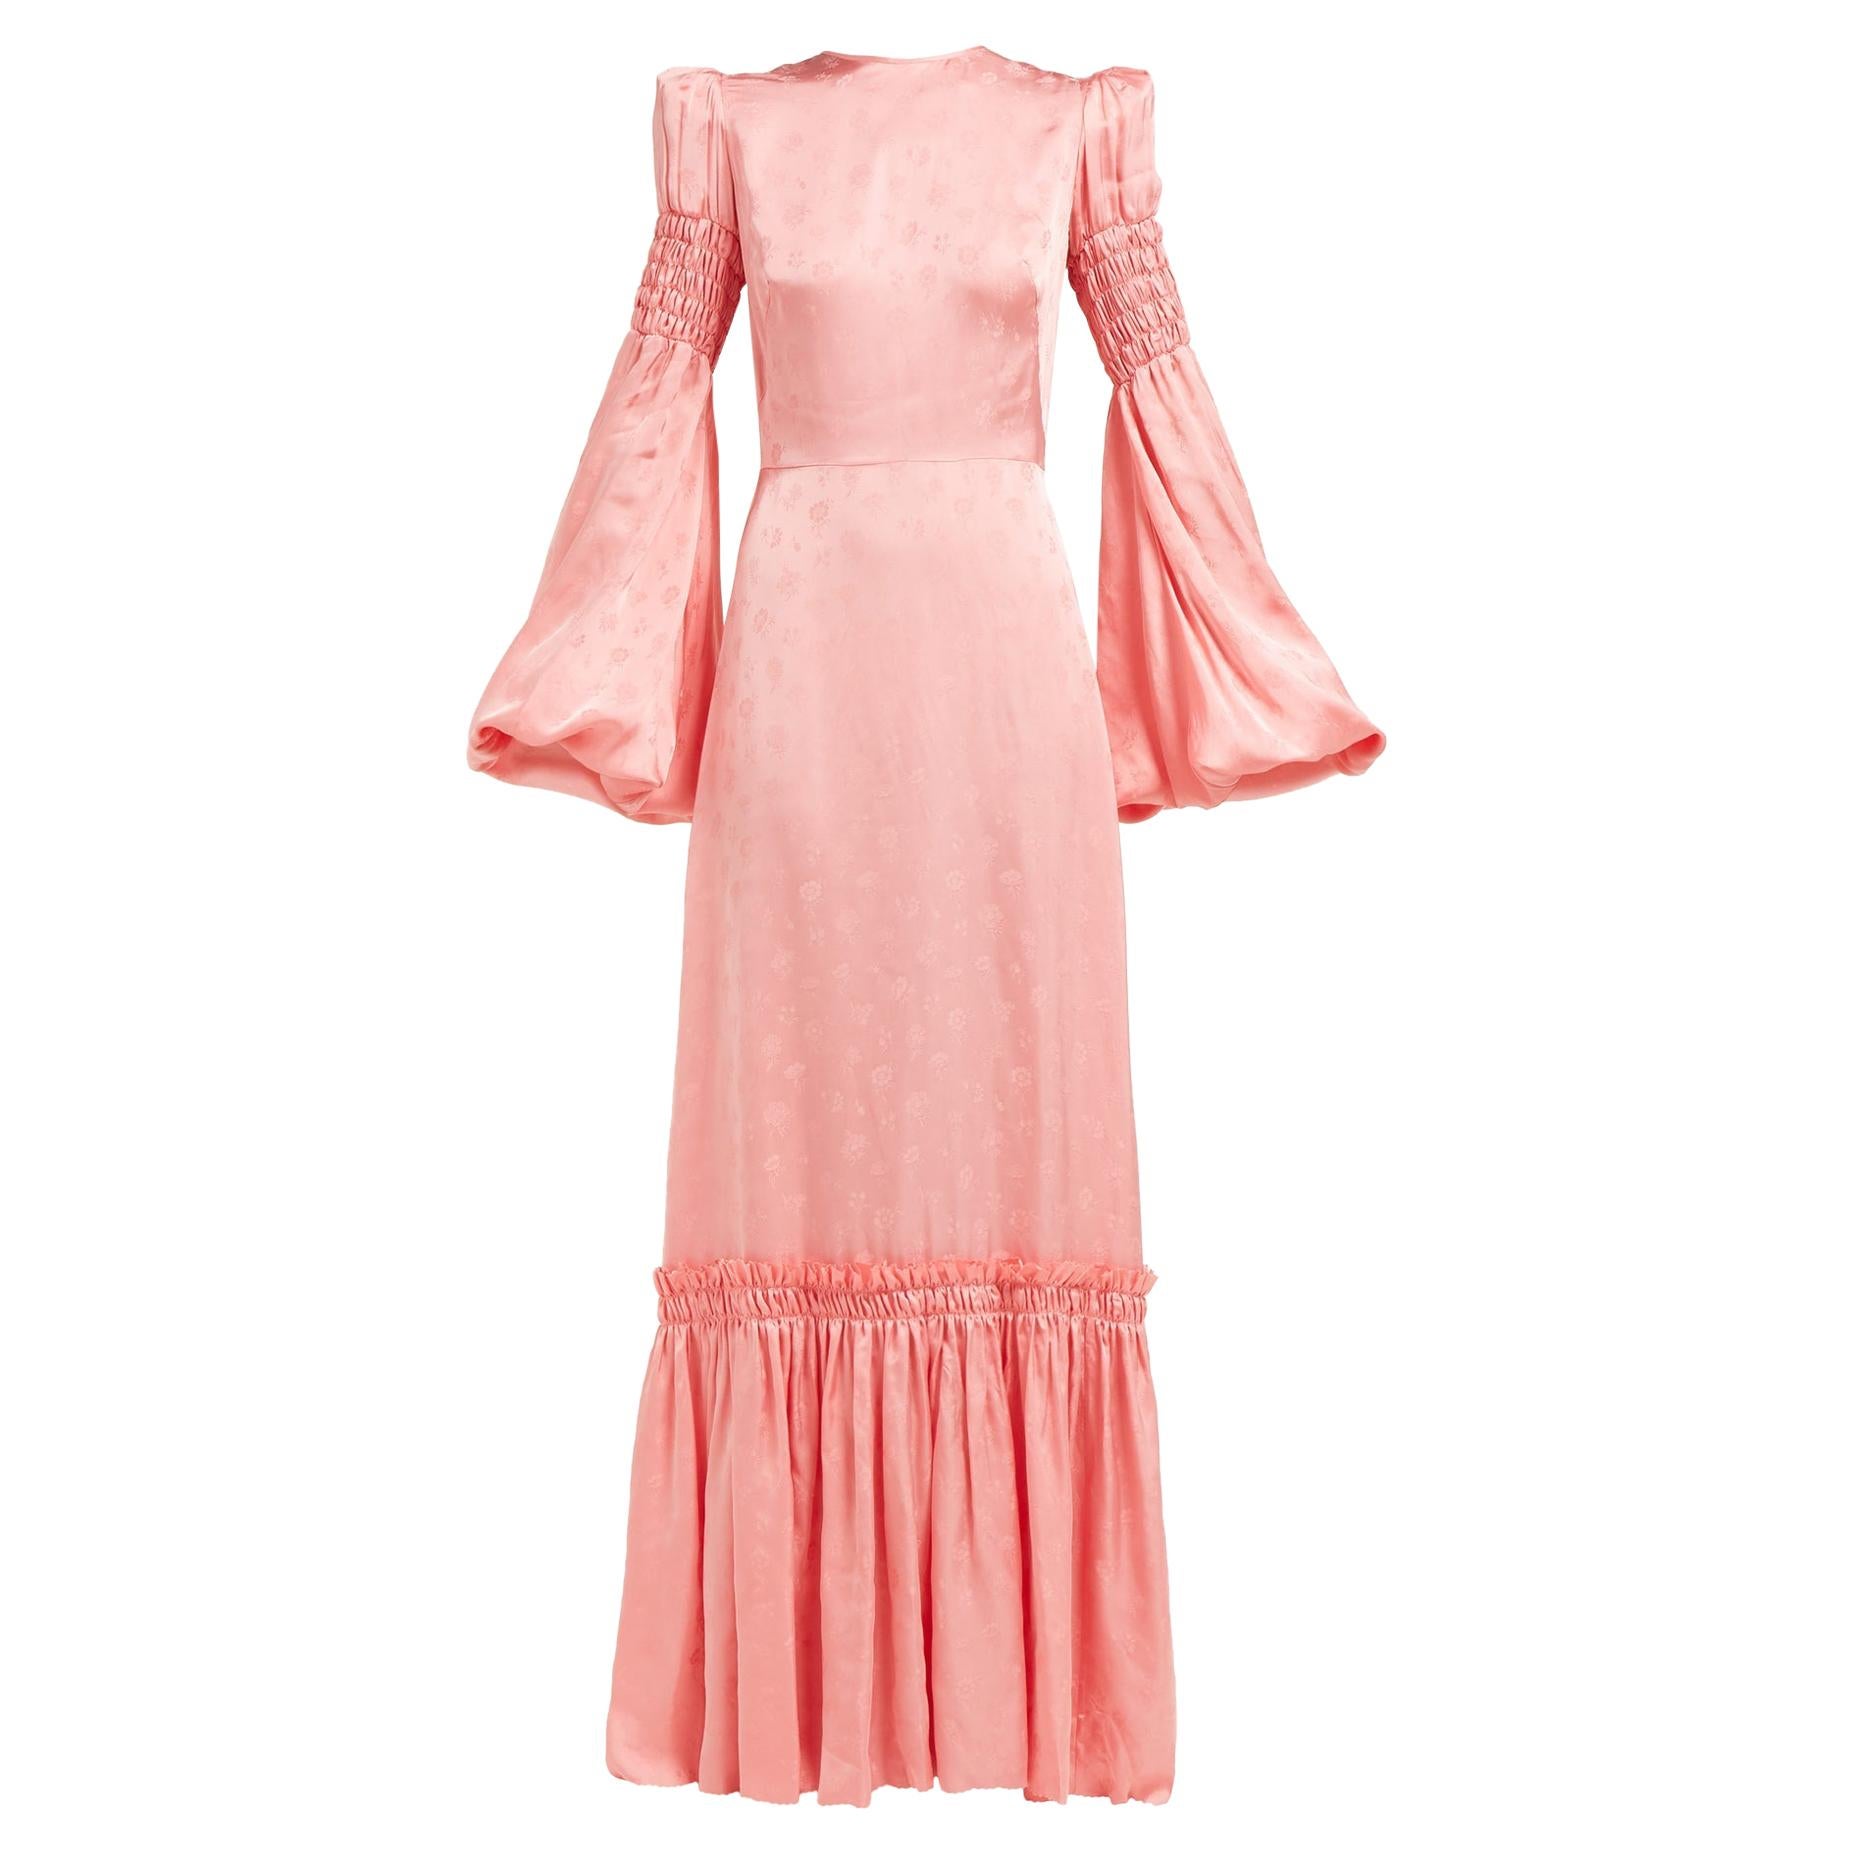 The Vampires Wife Blossom Dress Dress in Cosmo Damask Blush Pink - Size US 8